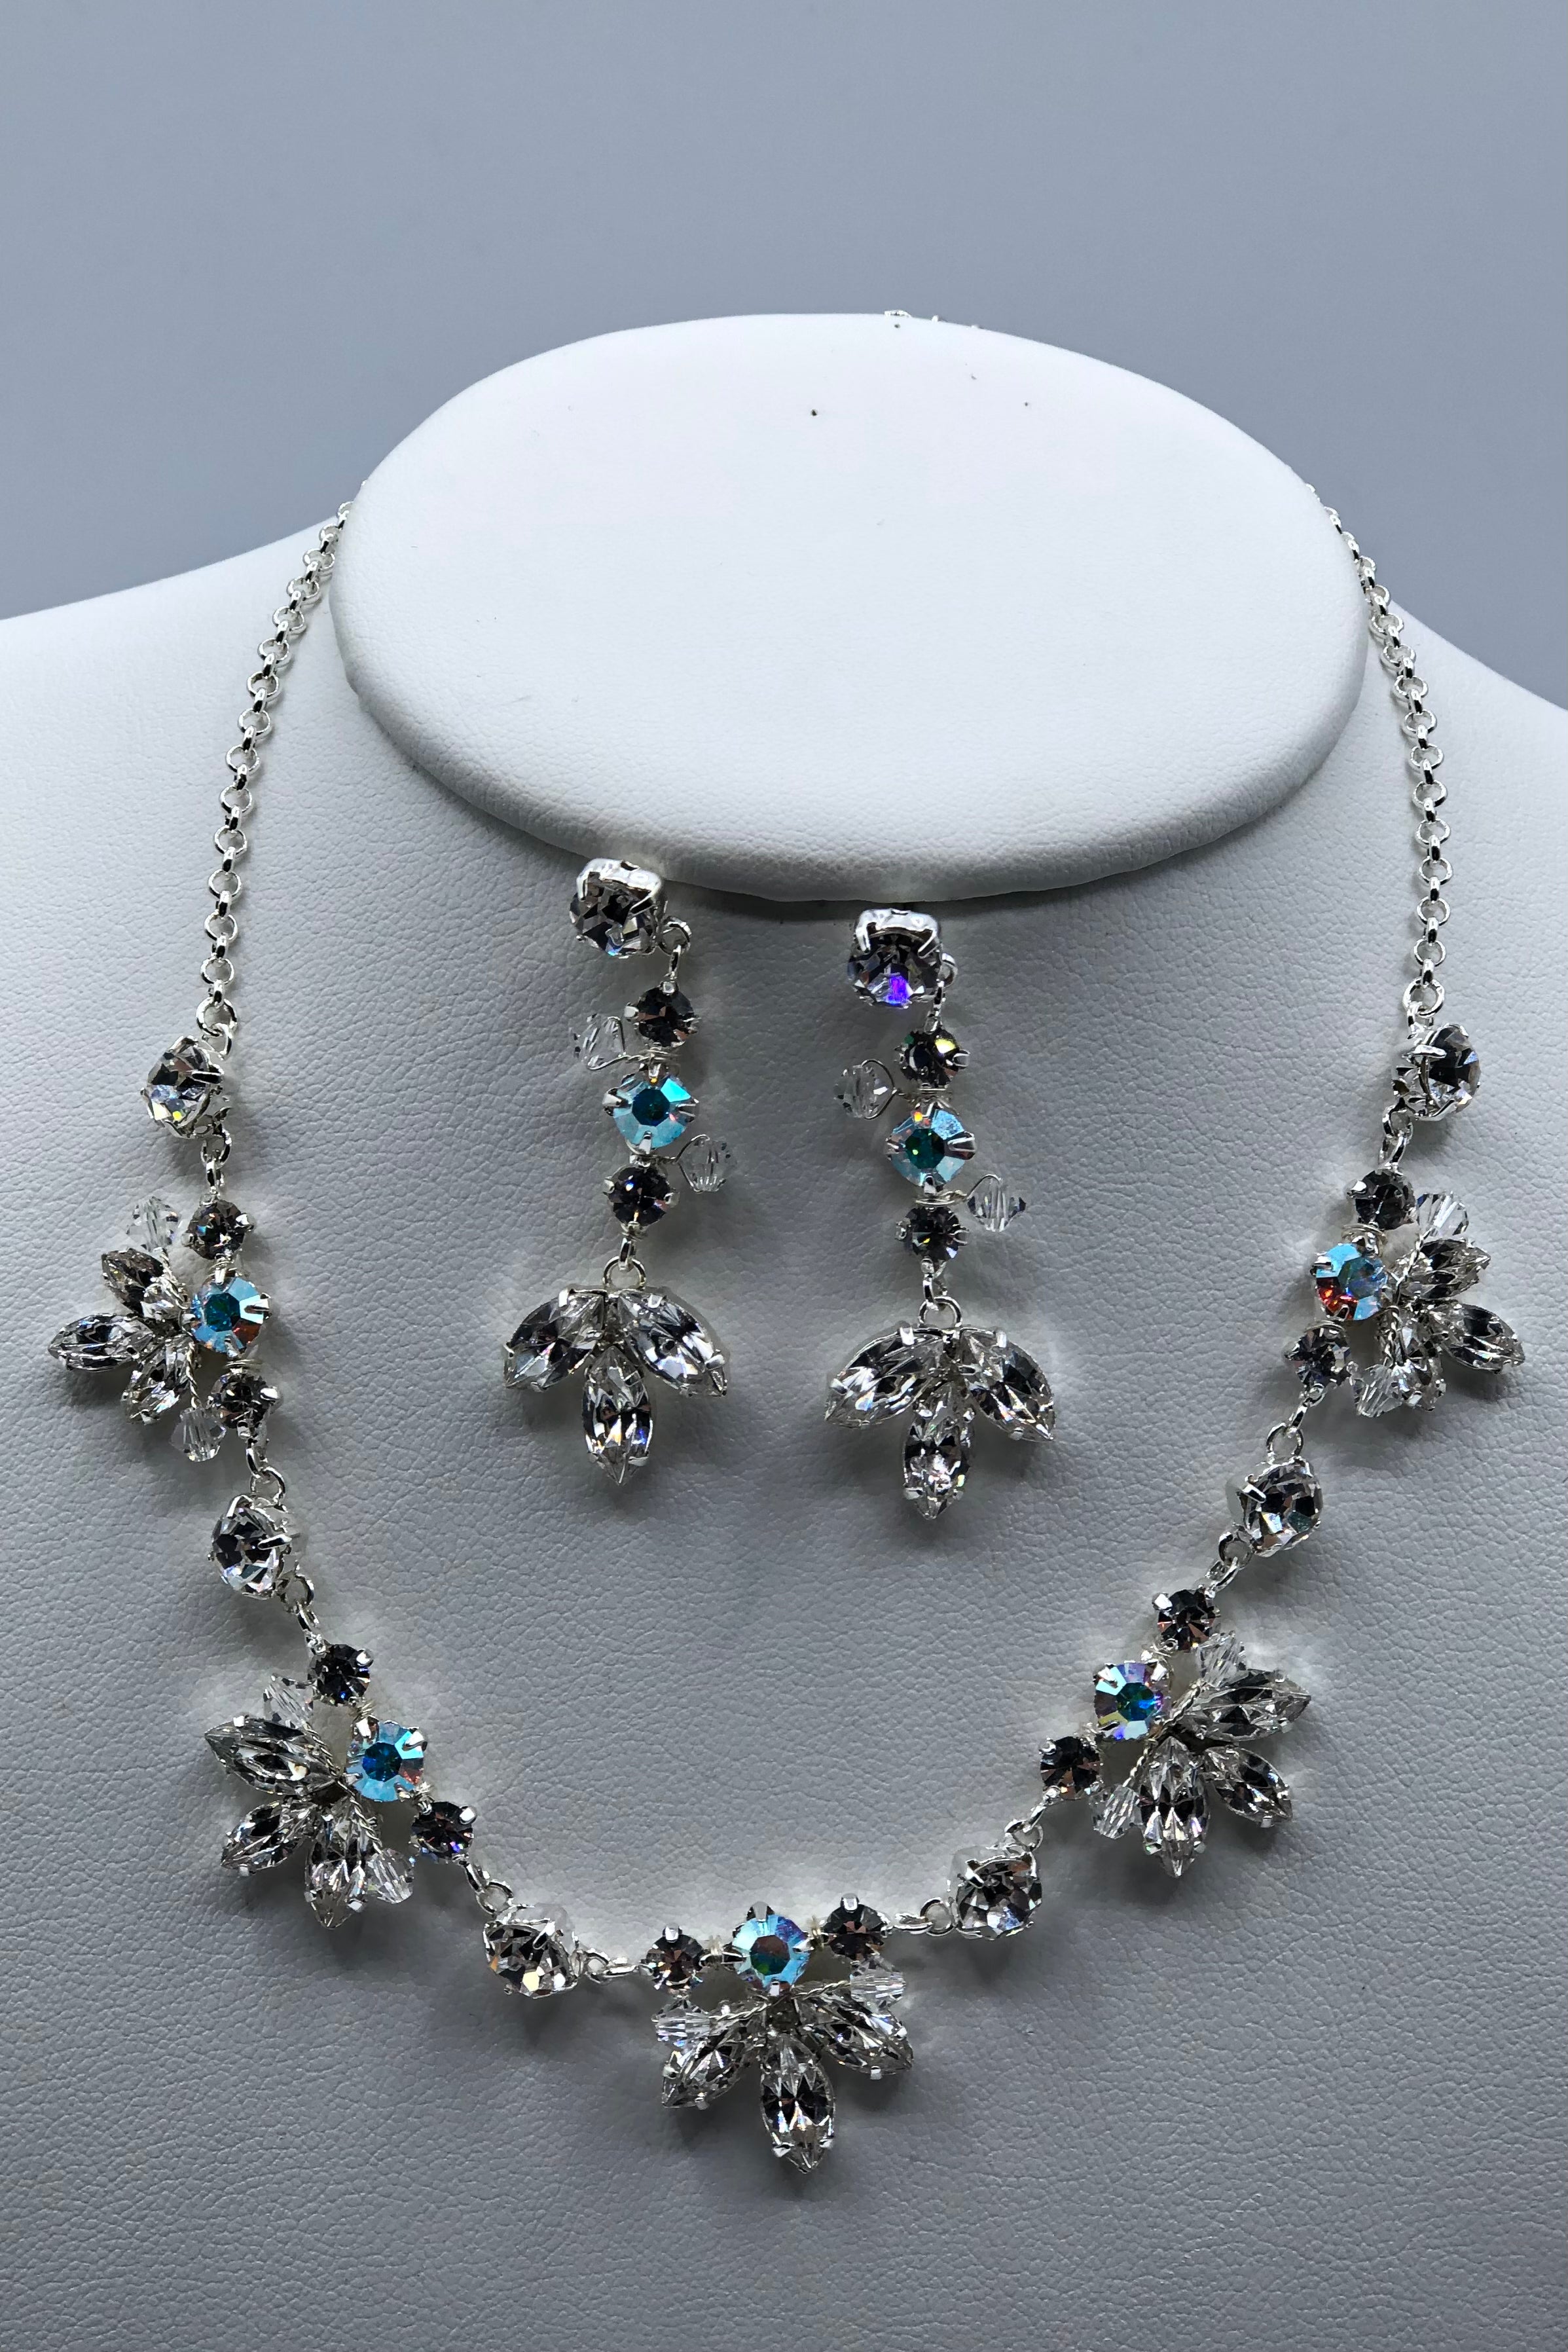 Elen Henderson Crystal Leaf Necklace and Earring Set